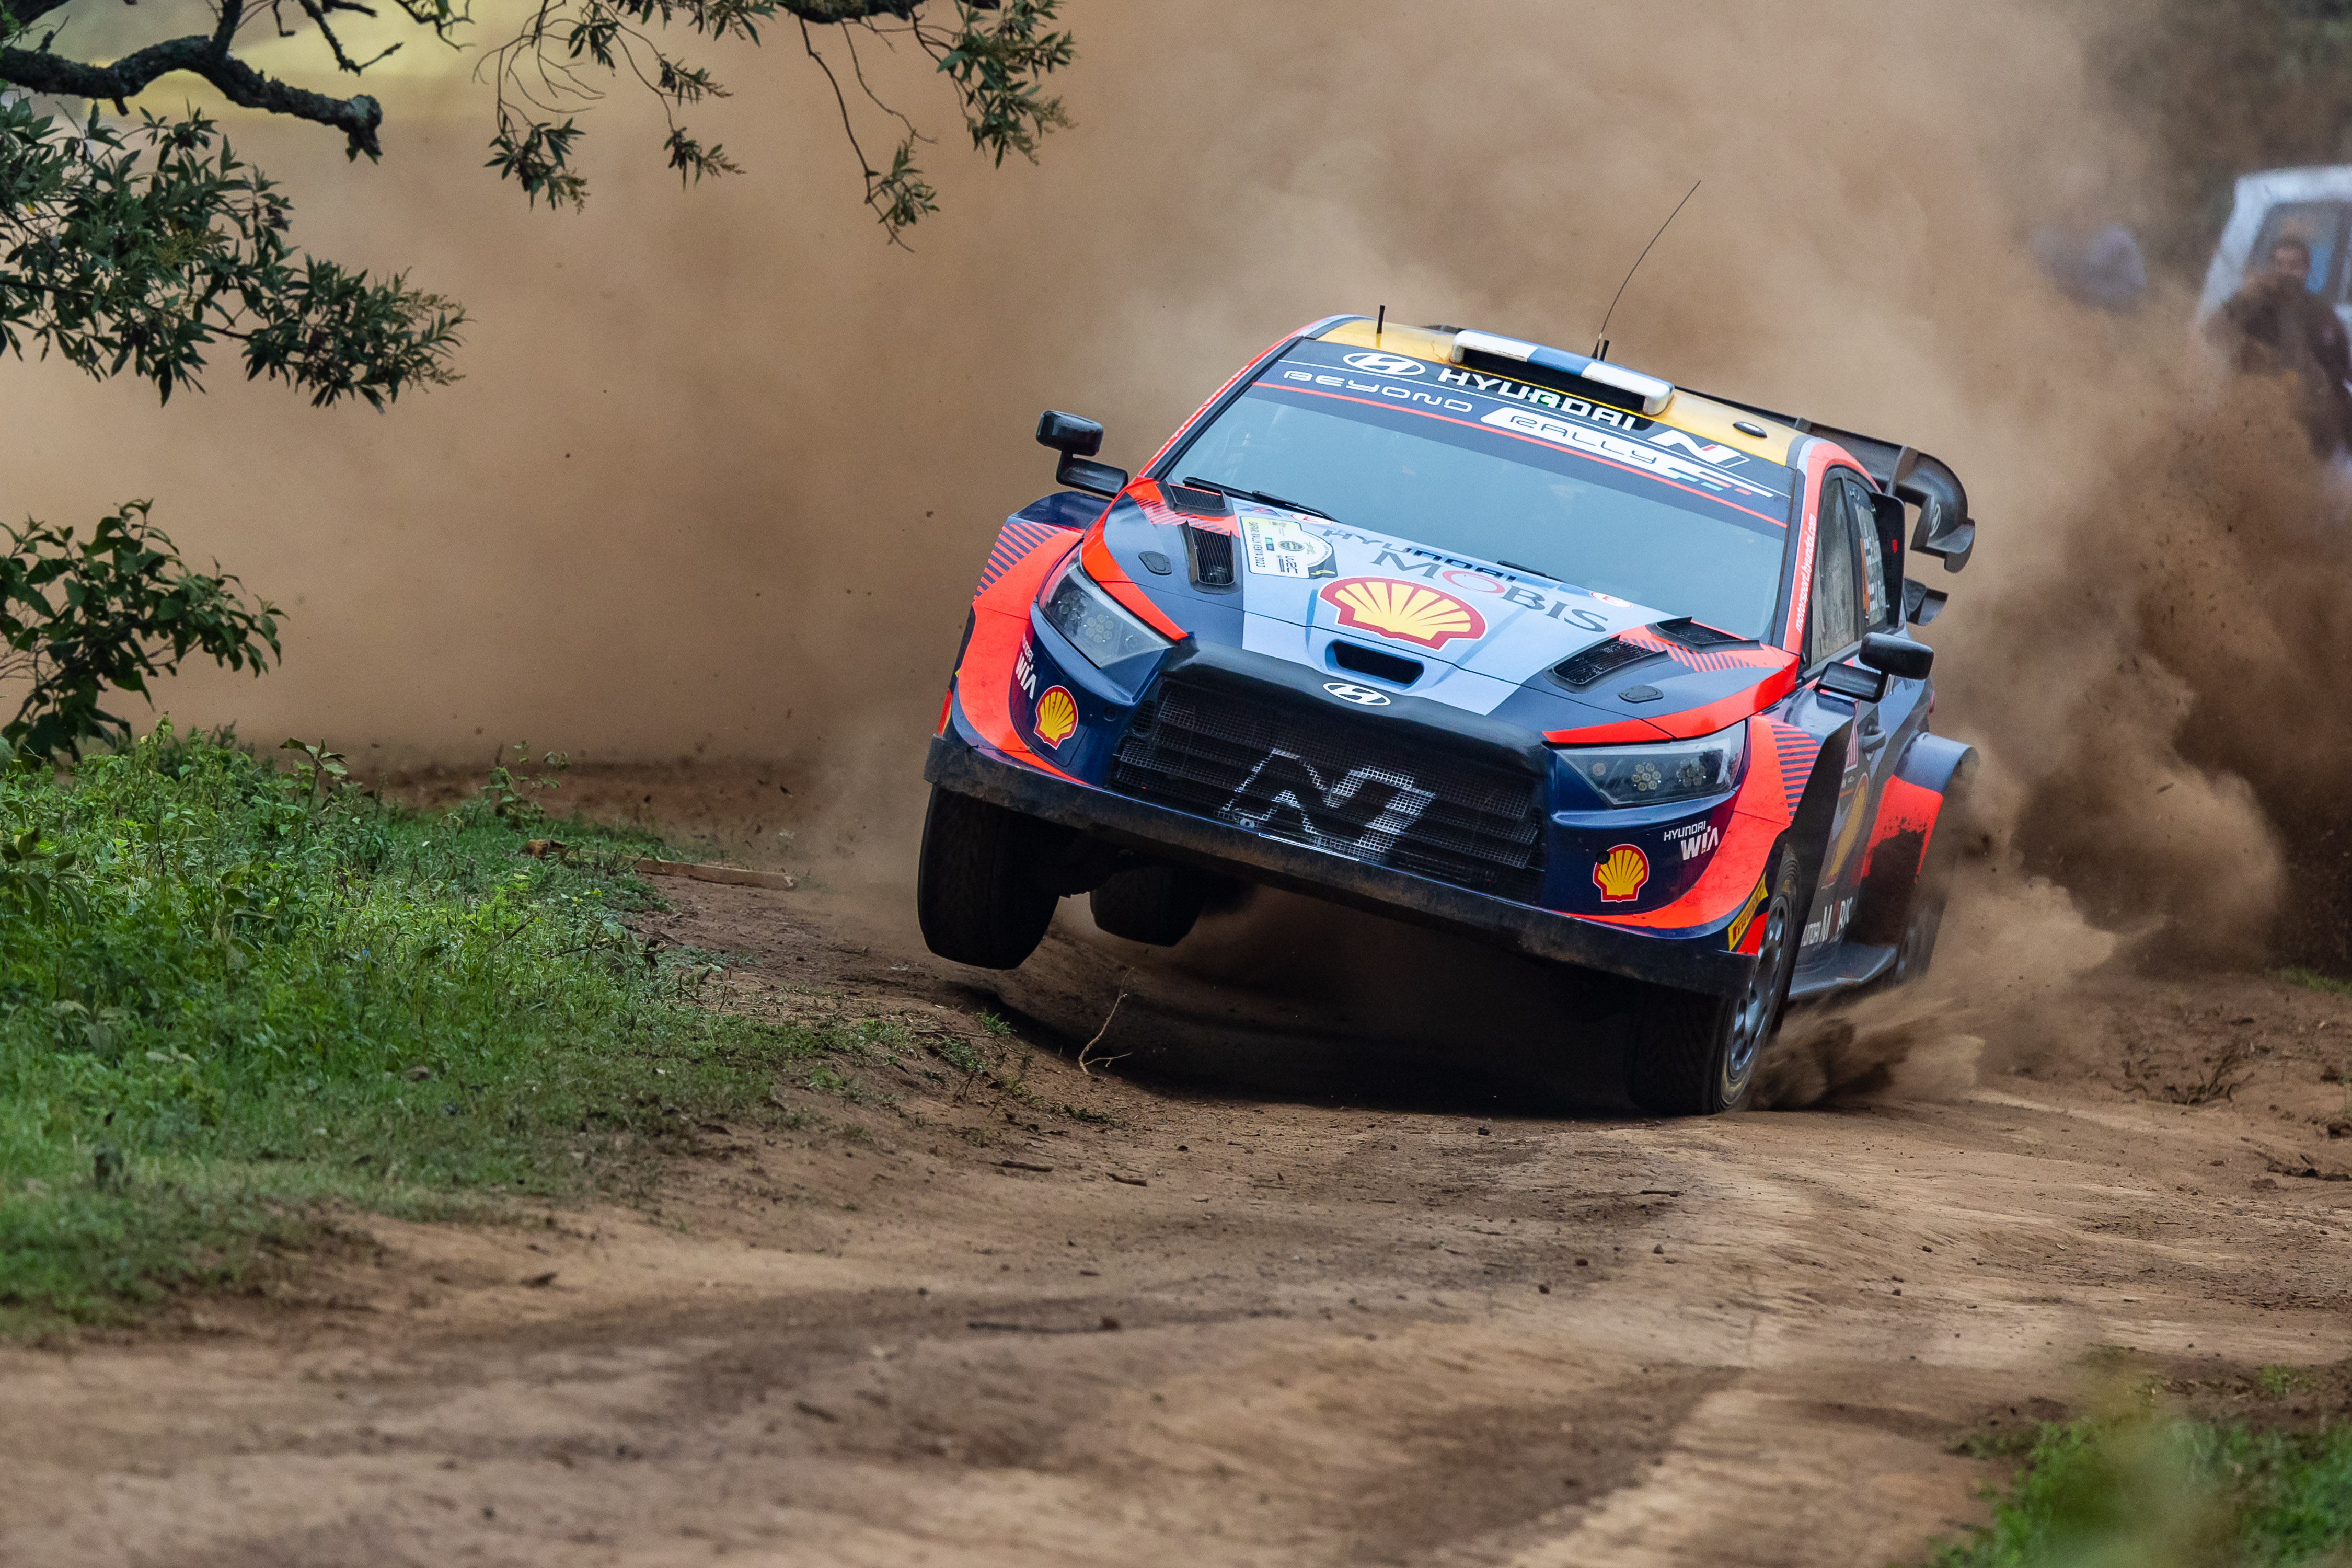 Evaluation of the World Rally Championship’s future prospects – DirtFish